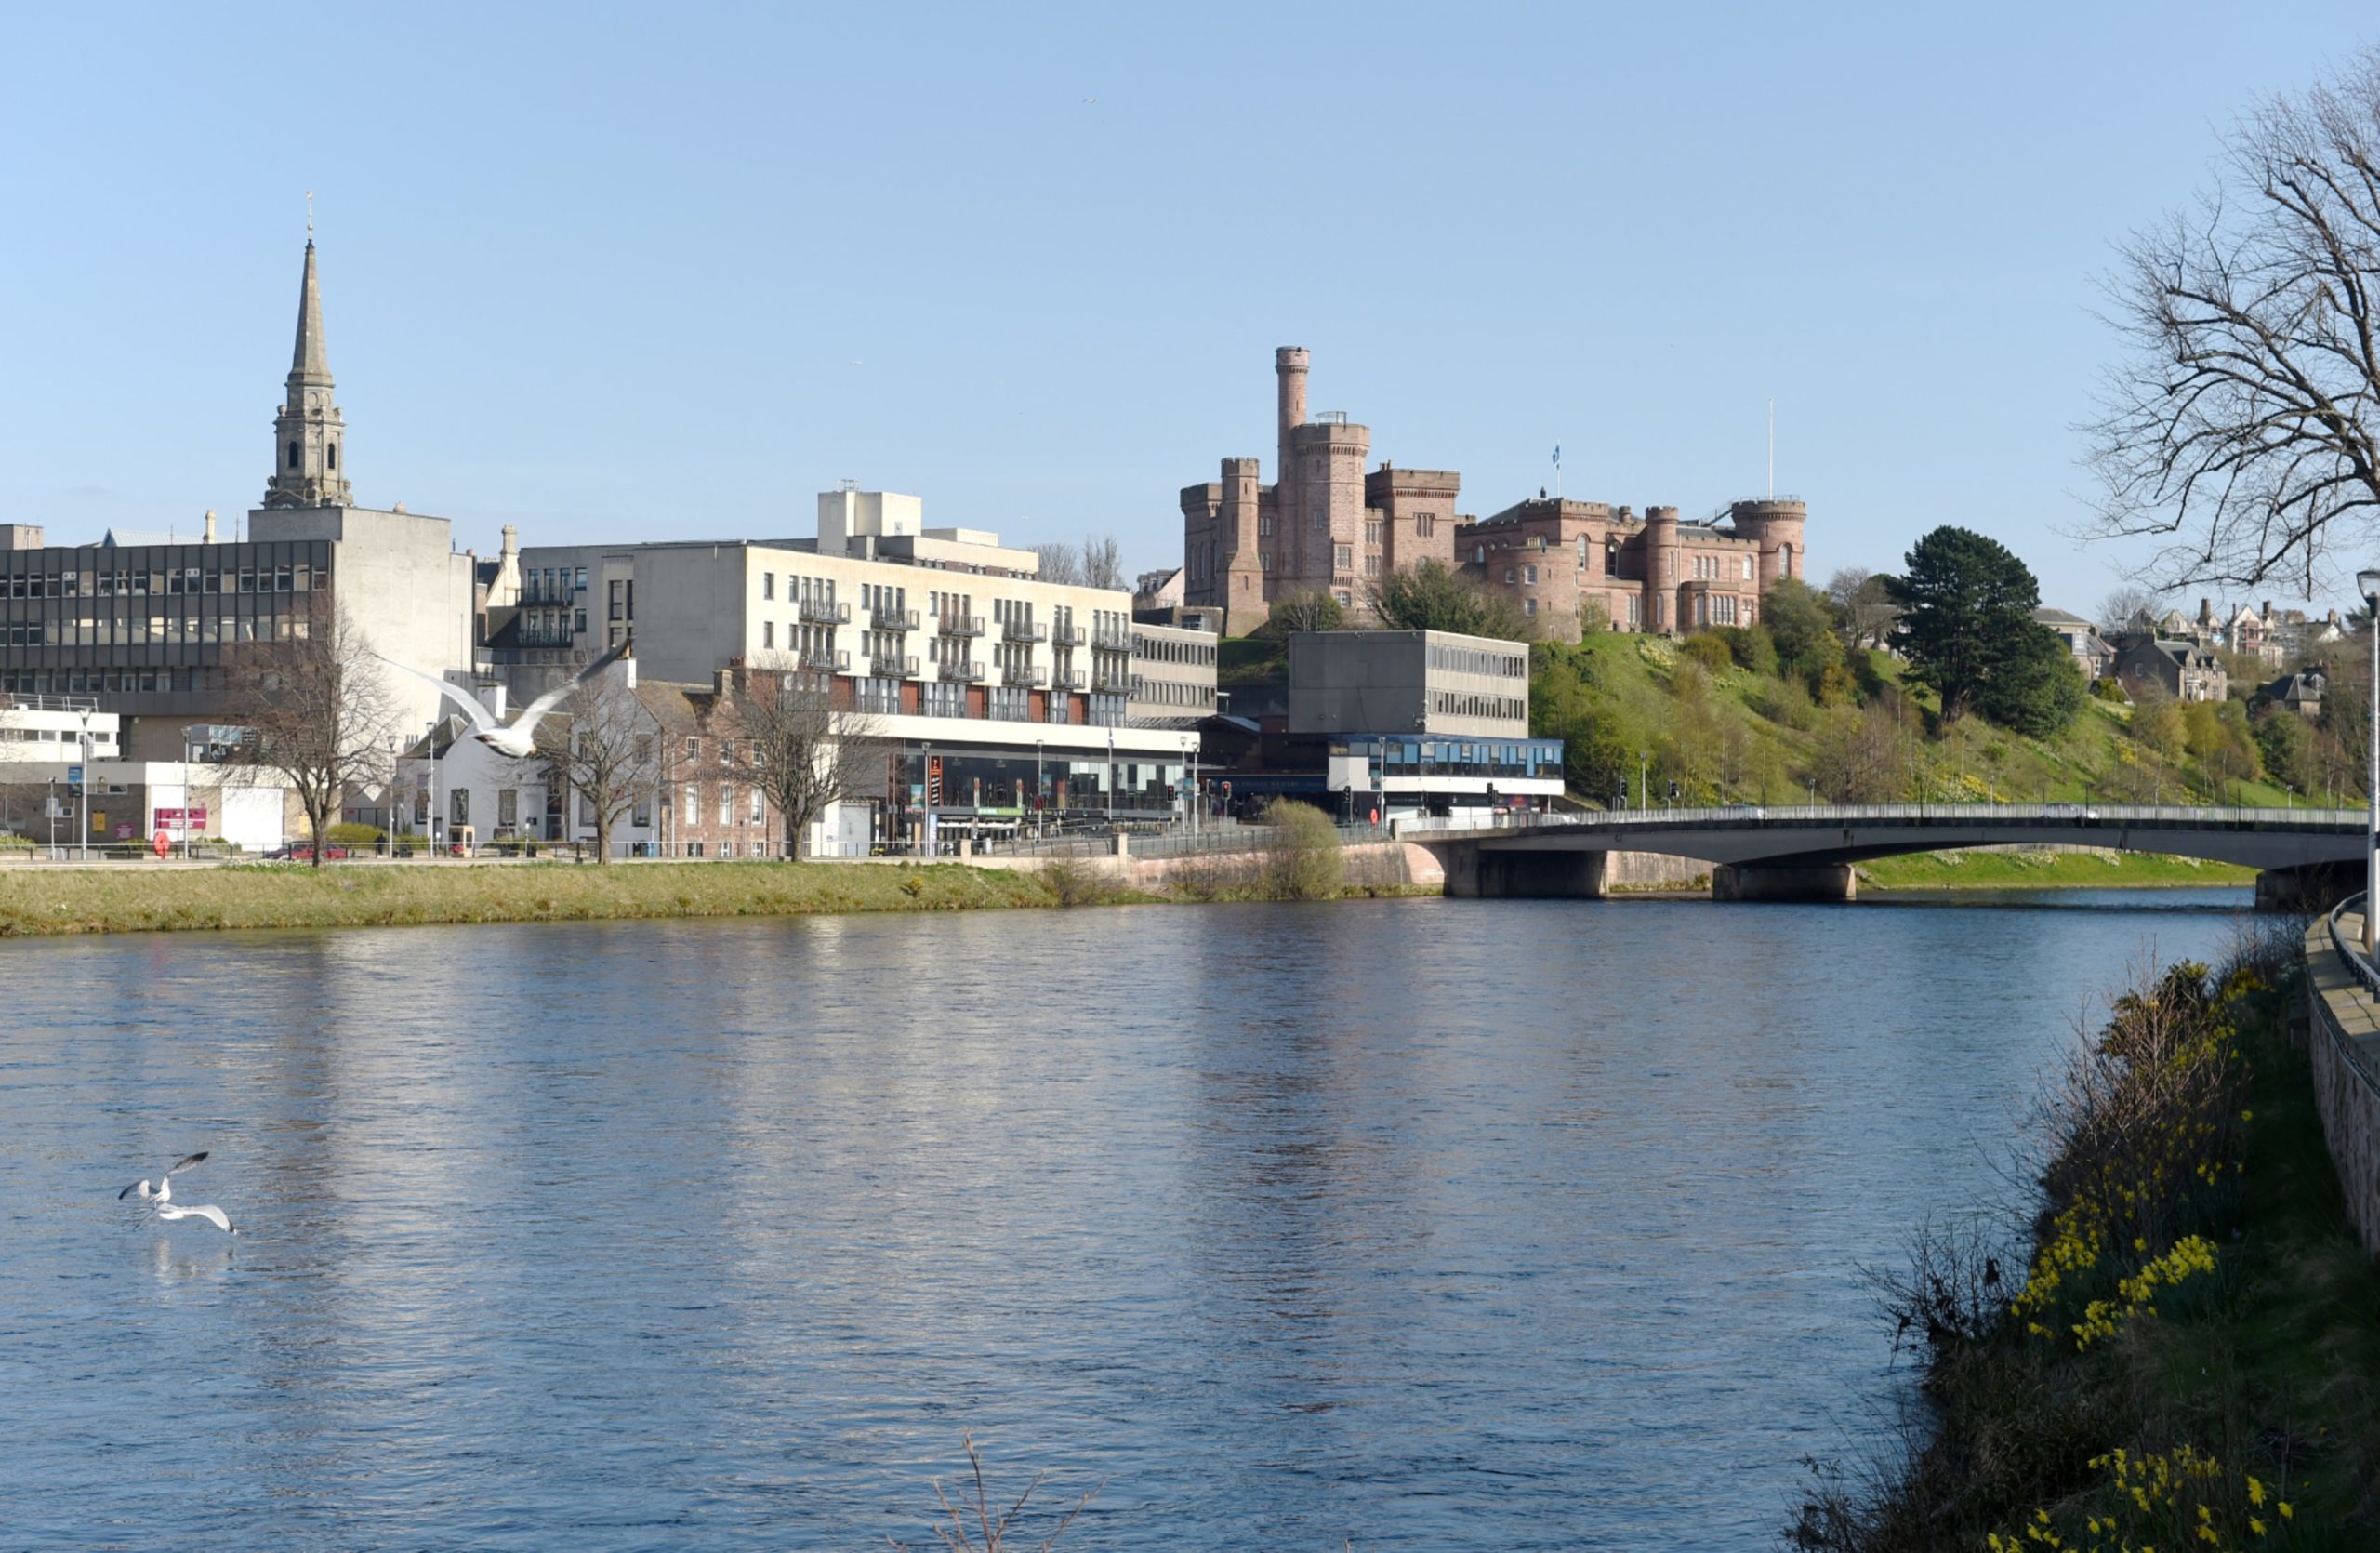 Picture by SANDY McCOOK    14th April '20
Inverness filers.
Ness Bridge over th River Ness with Inverness Castle.